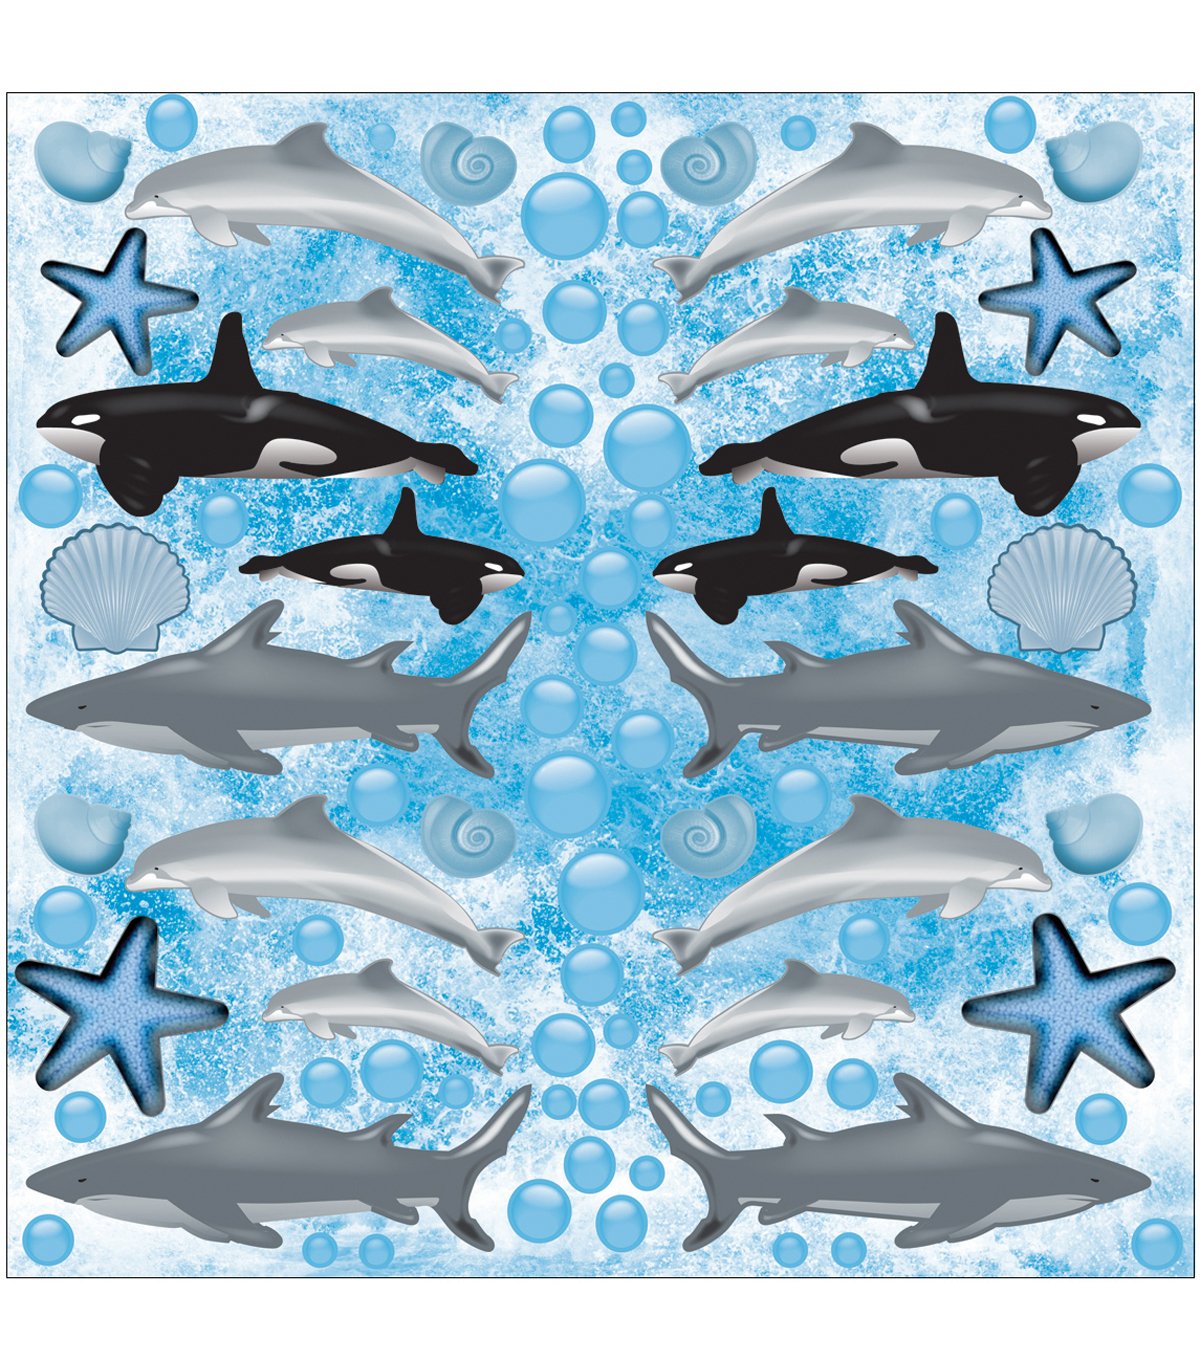 Dolphin, Sharks, Whales Stickers by Under the Sea Reminisce